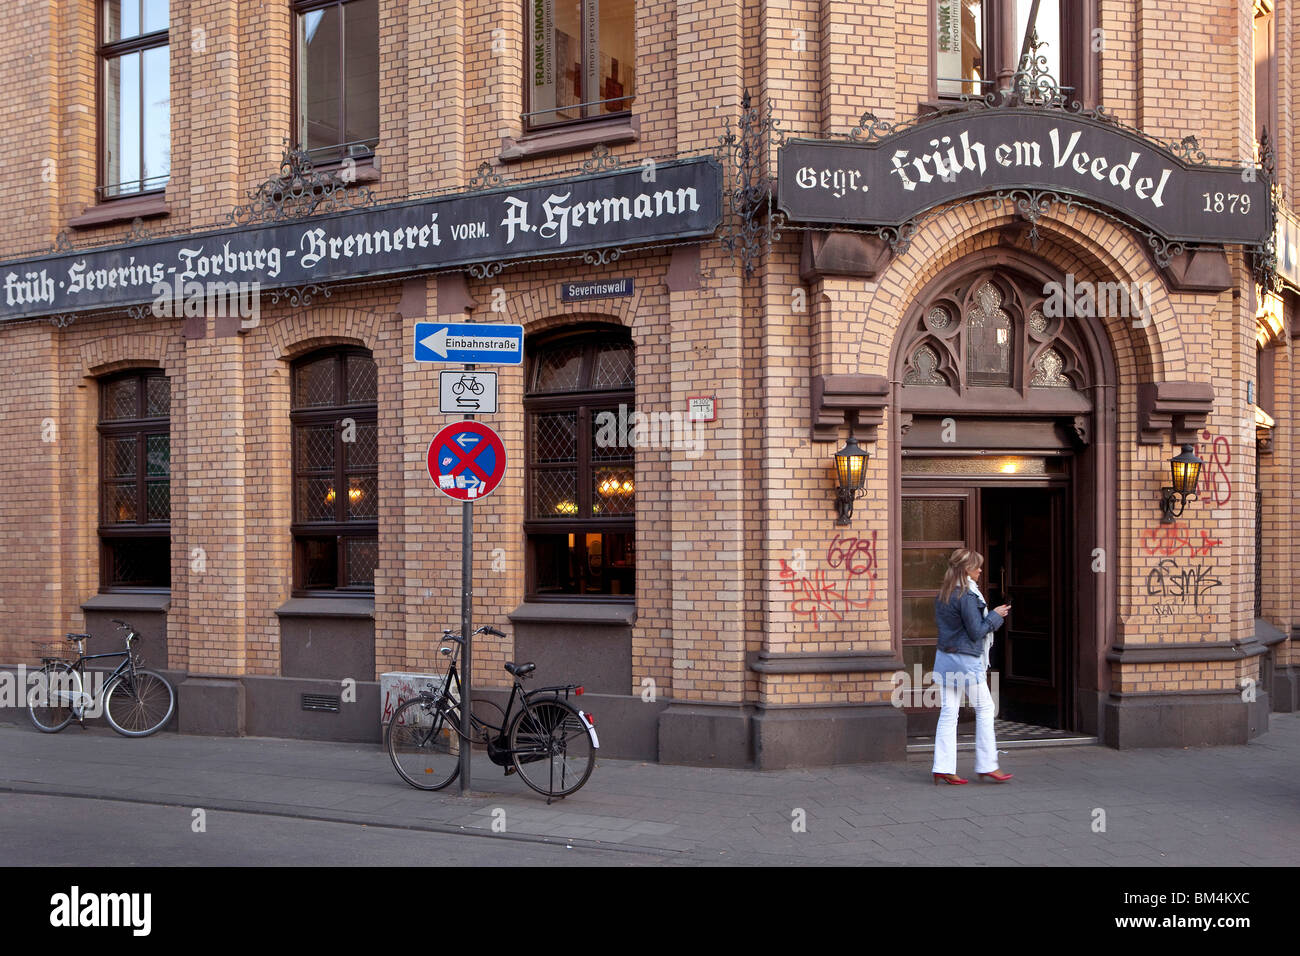 The beer tavern 'Frueh em Veedel' in the South of Cologne. It's one of the oldest pubs of Cologne and was founded in 1879 Stock Photo